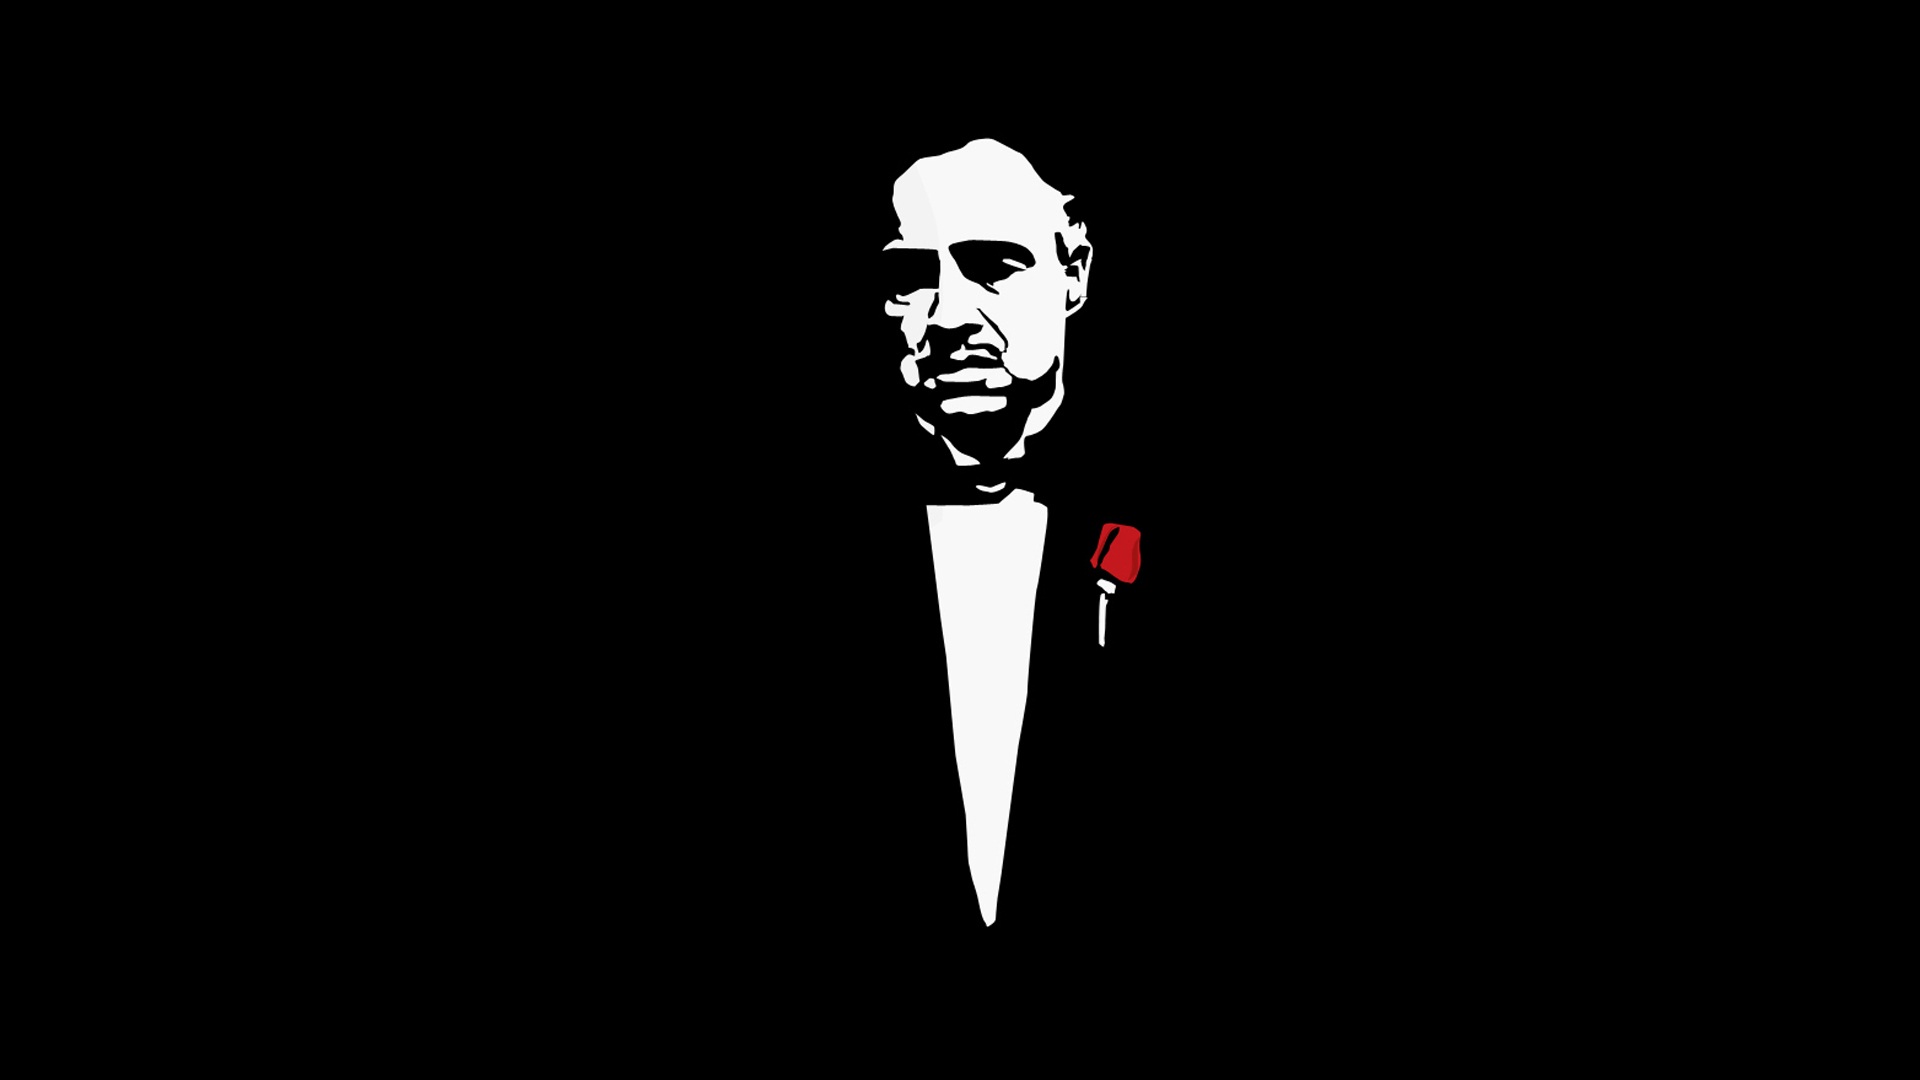 The Godfather HD Wallpaper